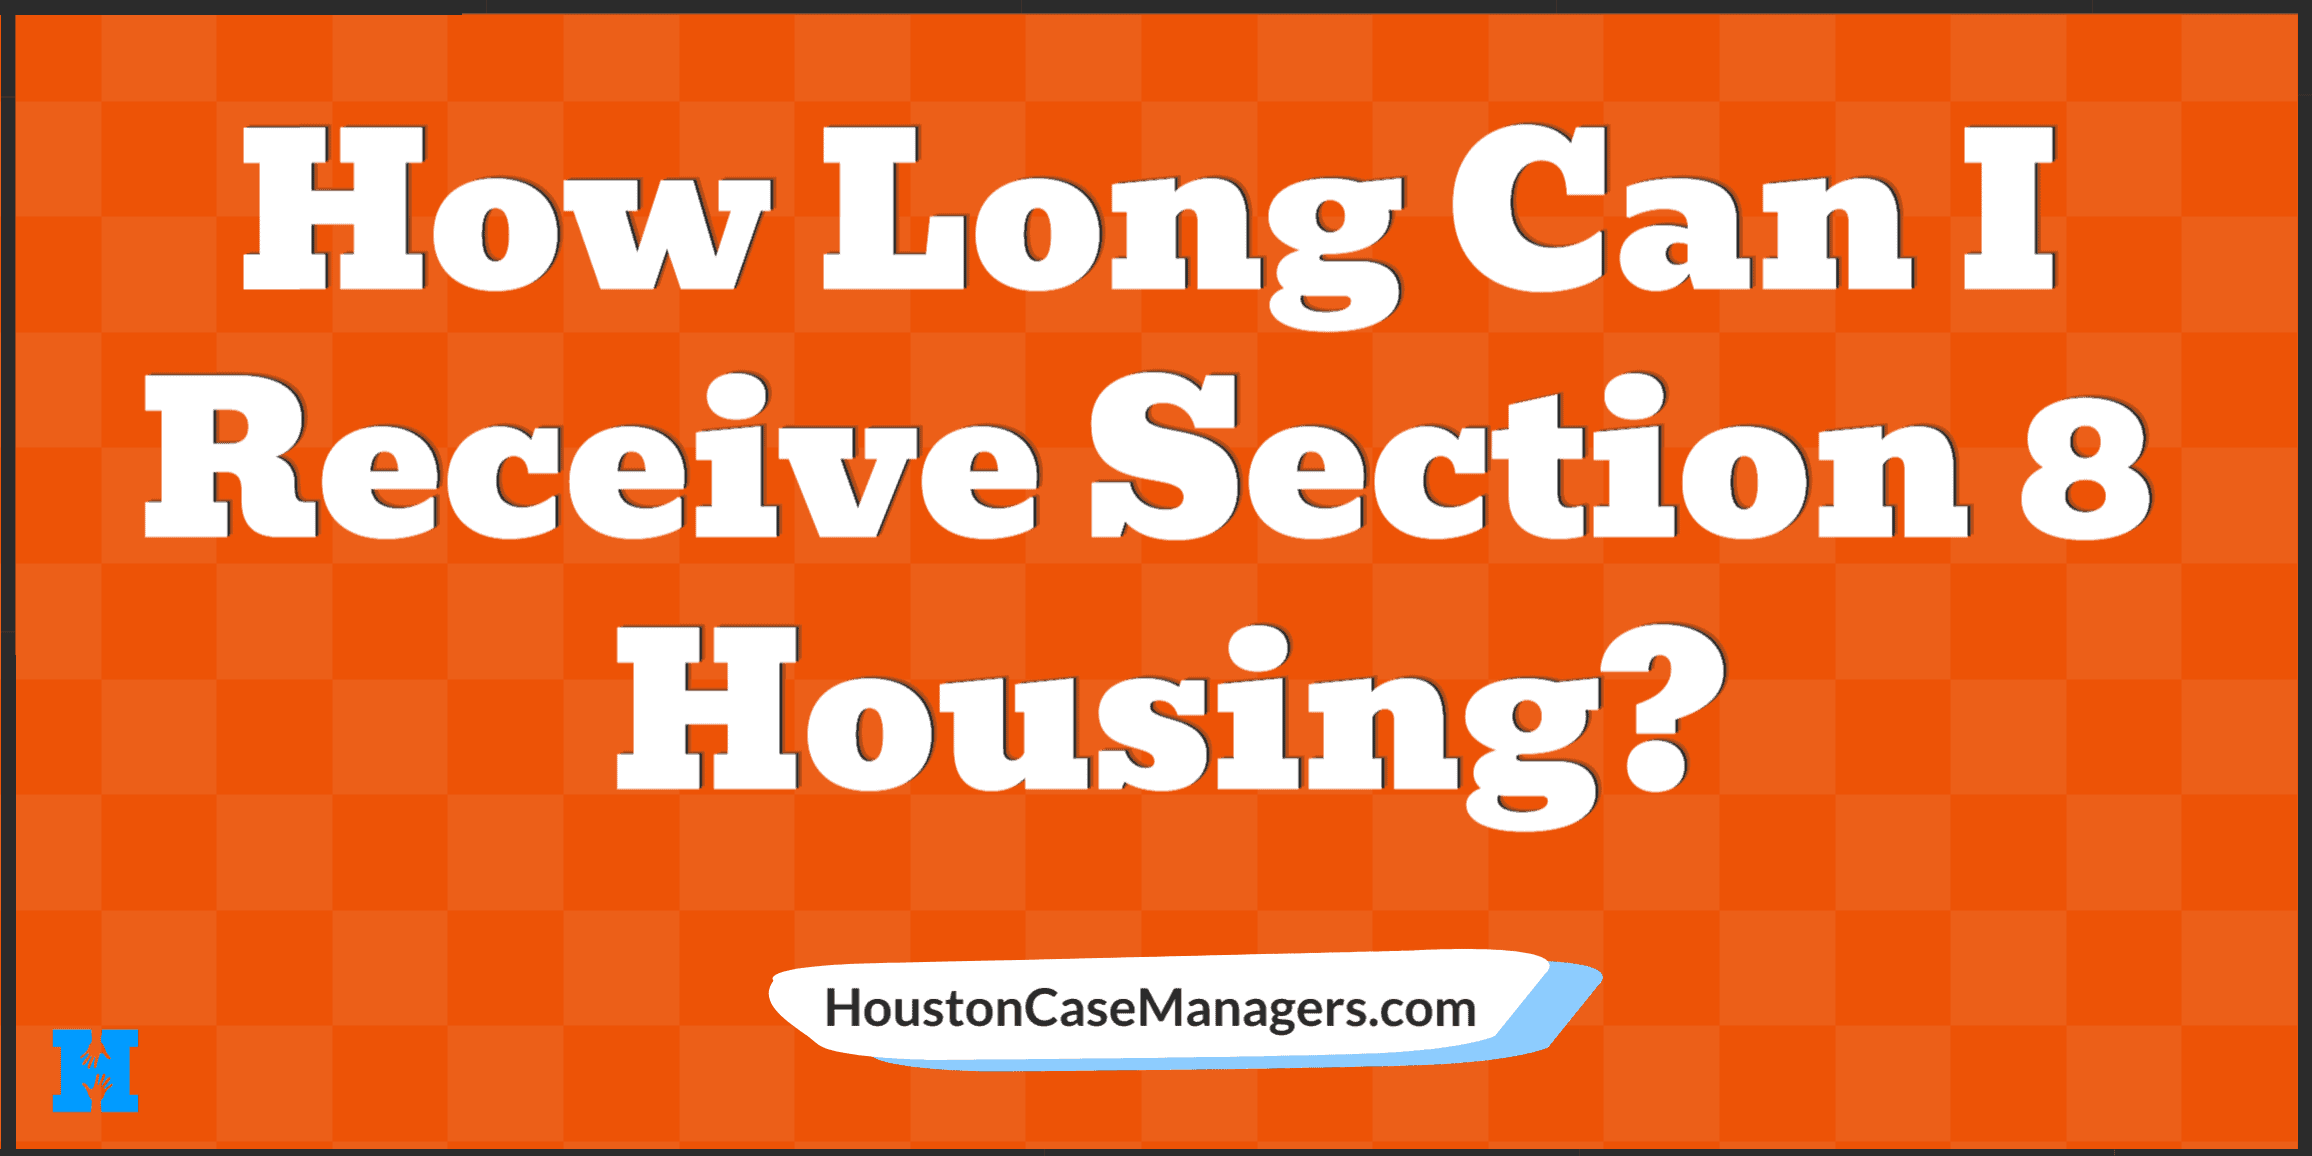 How Long Can I Receive Section 8 Housing?